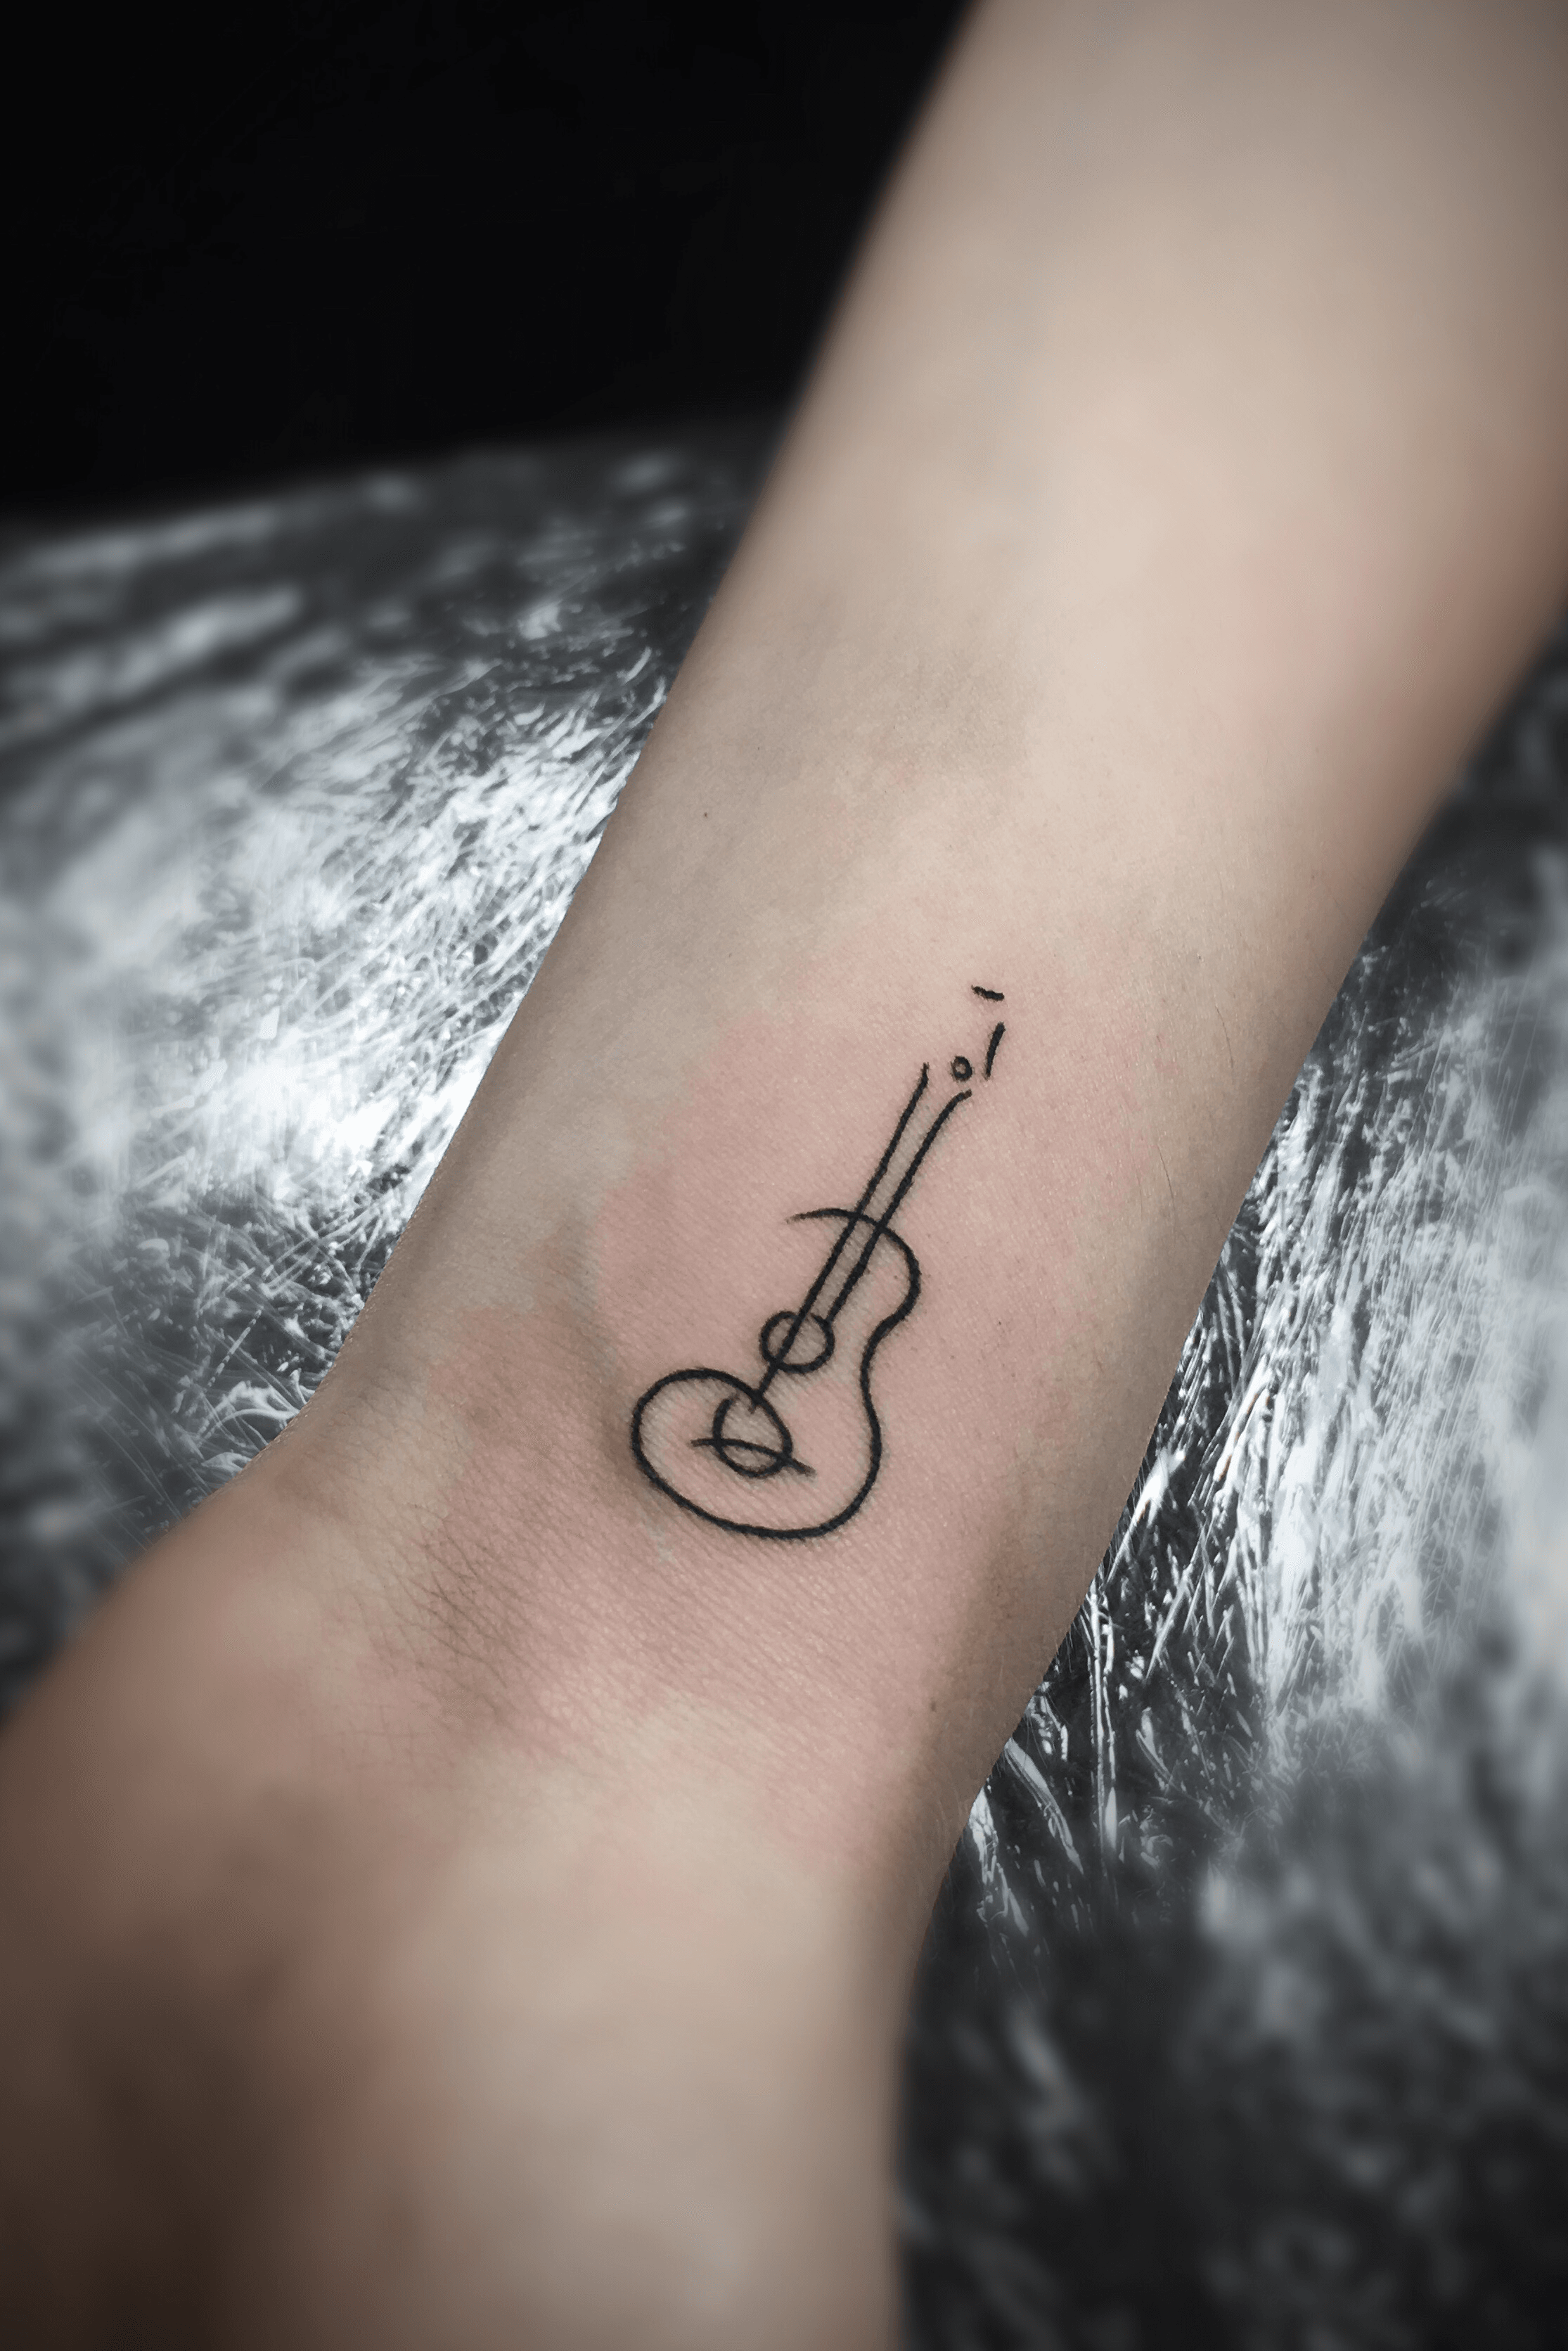 101 Awesome Guitar Tattoo Ideas You Need To See  Guitar tattoo design Guitar  tattoo Music guitar tattoo